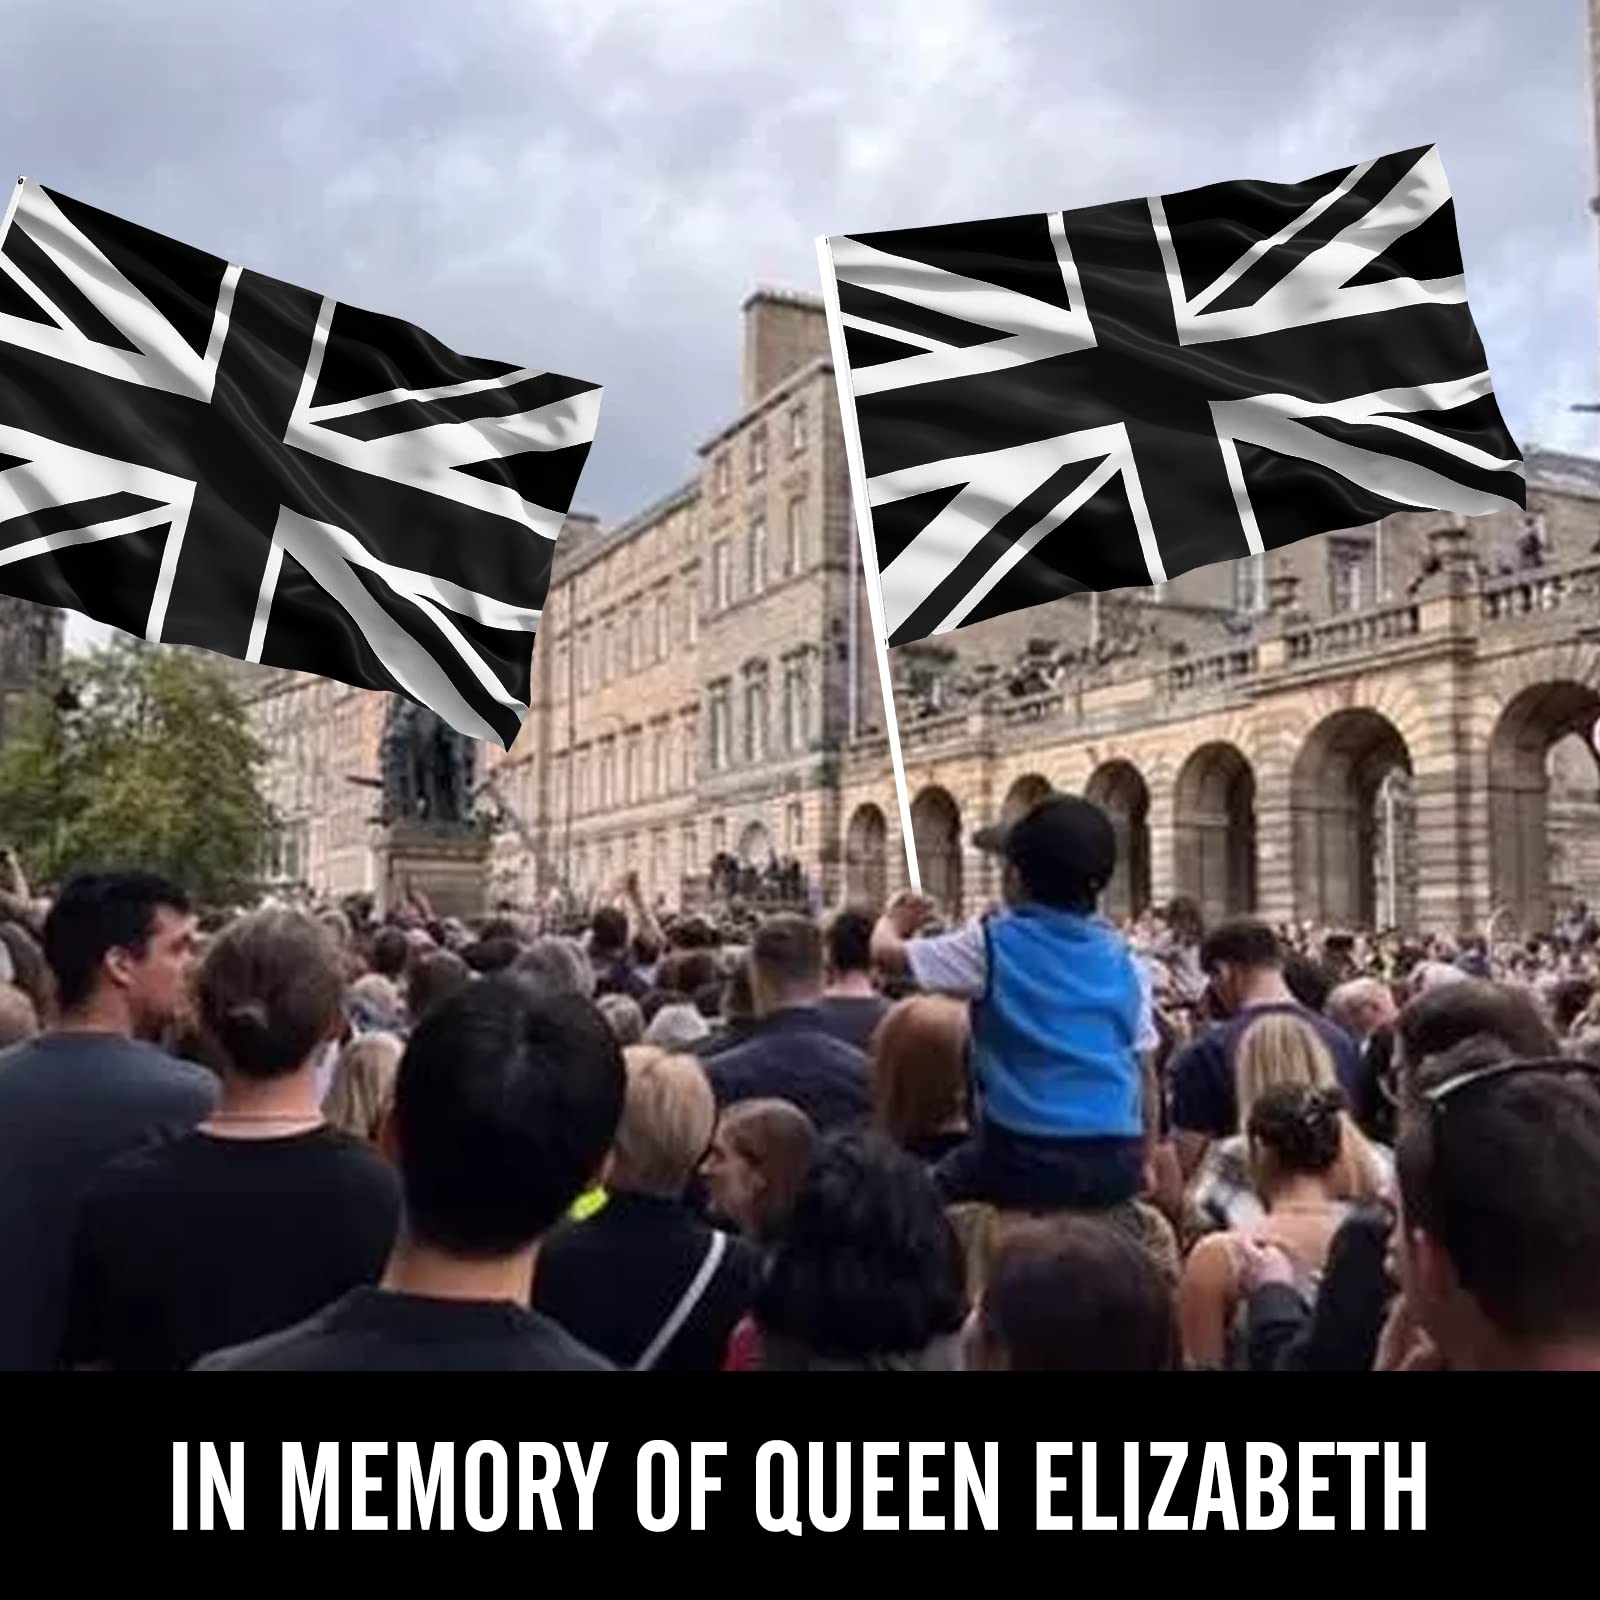 Black Union Jack Flag 5ft x 3ft, Tribute to Queen Elizabeth, Black and White Union Jack Flag for Parade, UV Fade Resistant British Flag with Eyelets